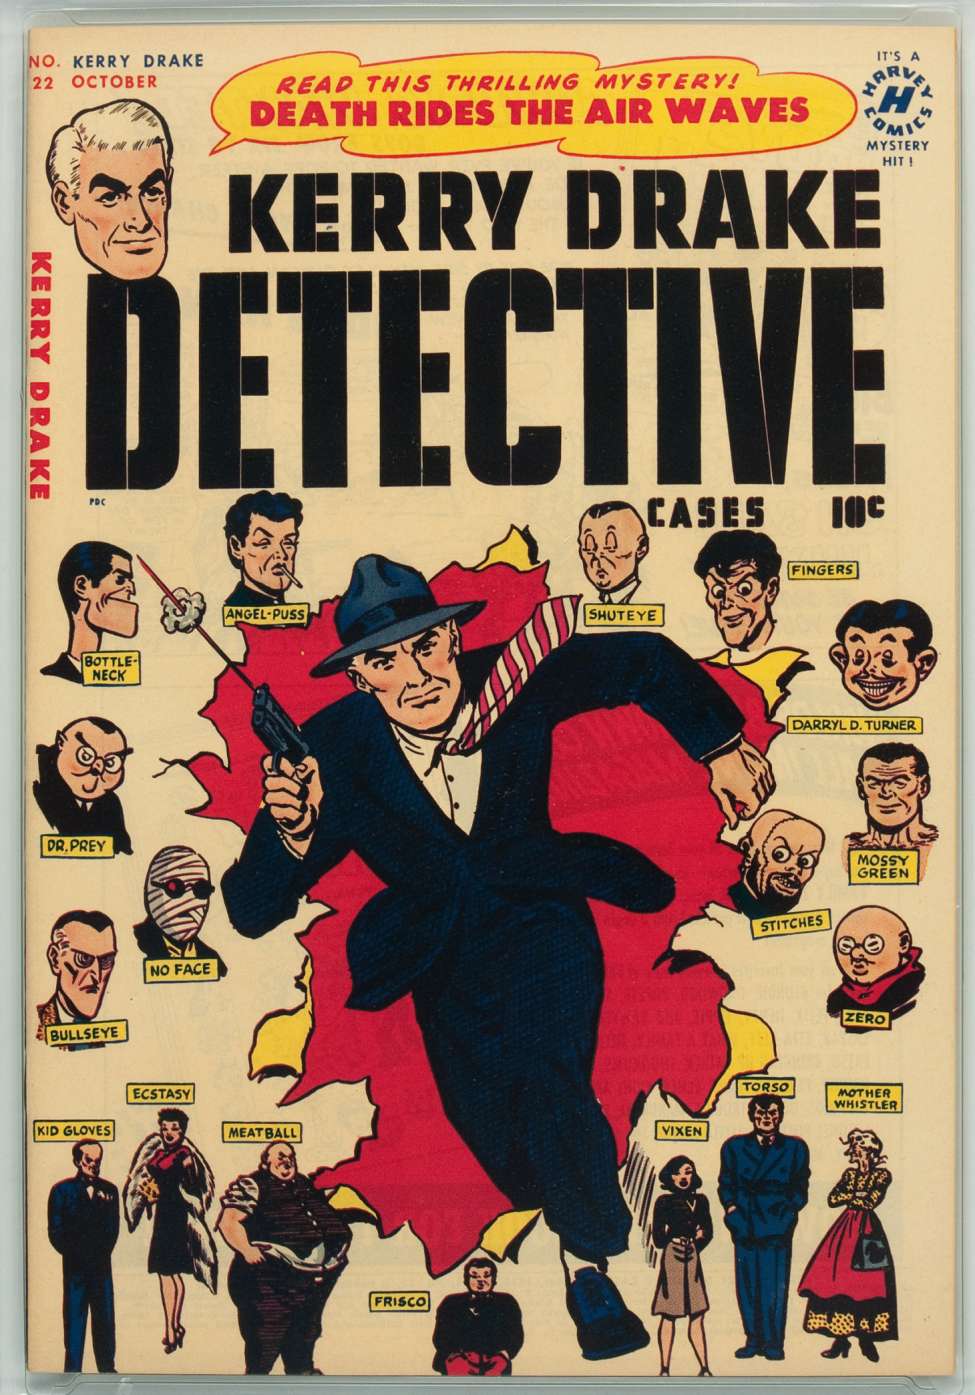 Comic Book Cover For Kerry Drake Detective Cases 22